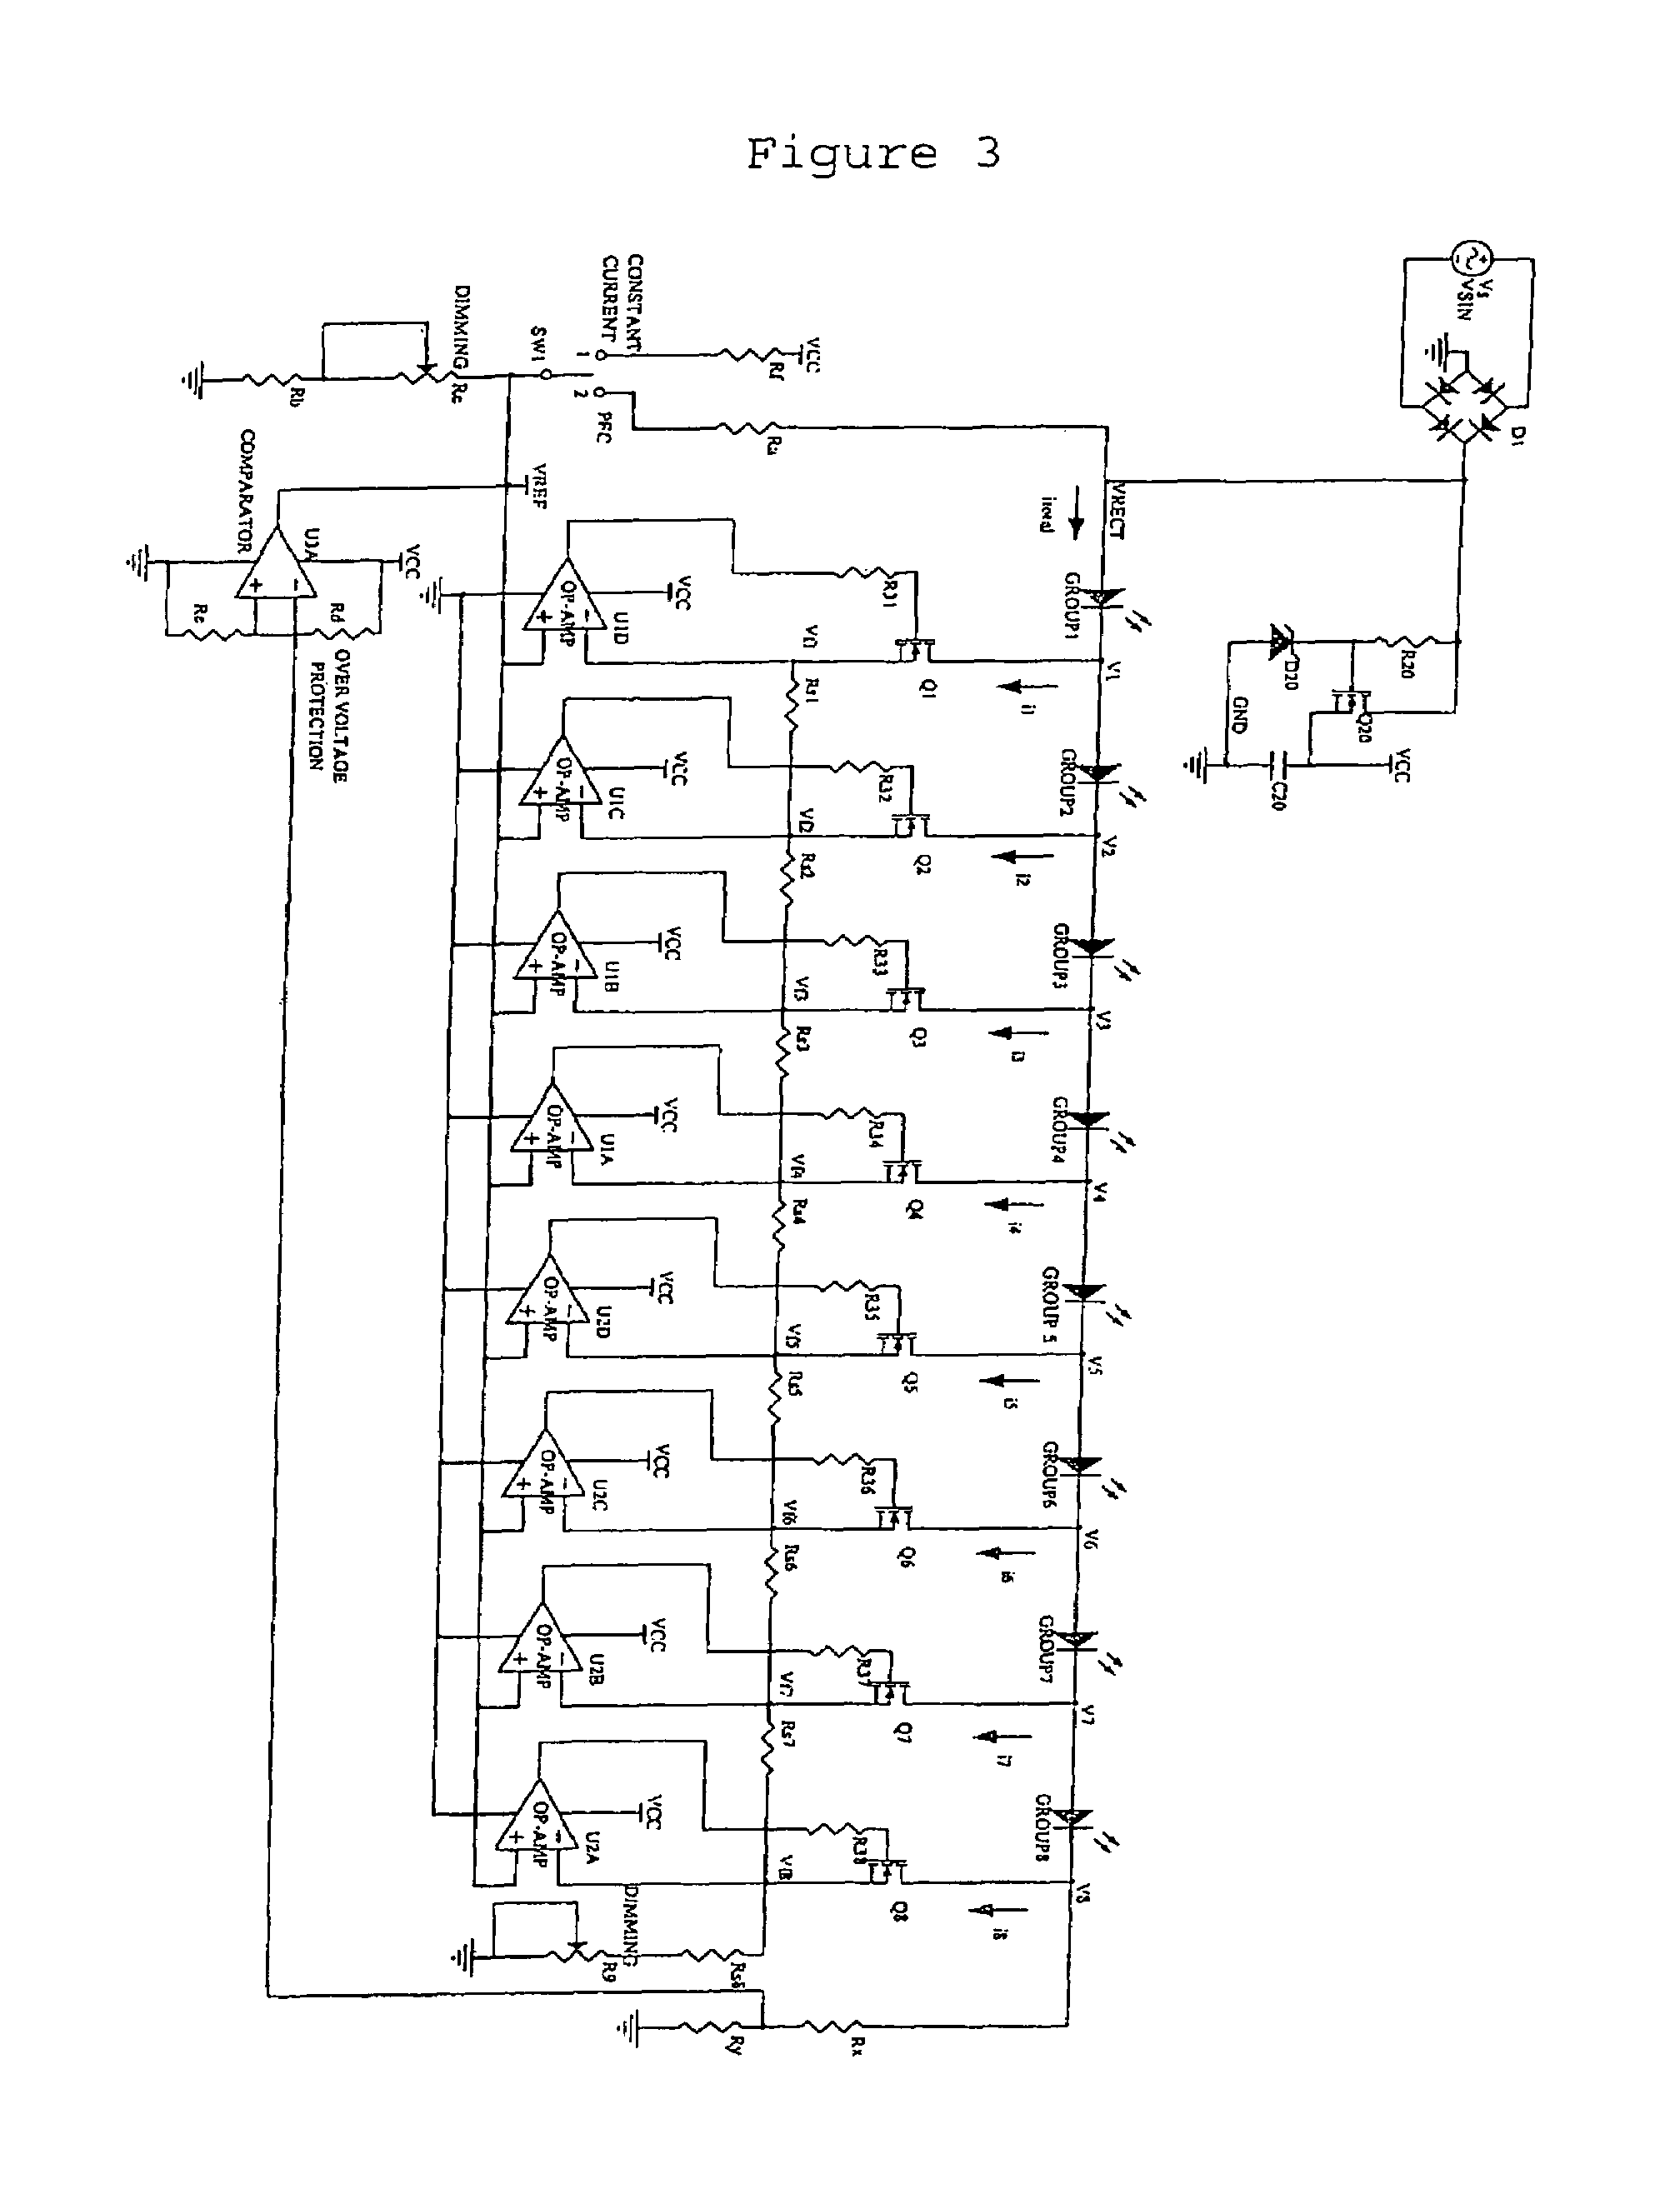 Light emitting diode multiphase driver circuit and method